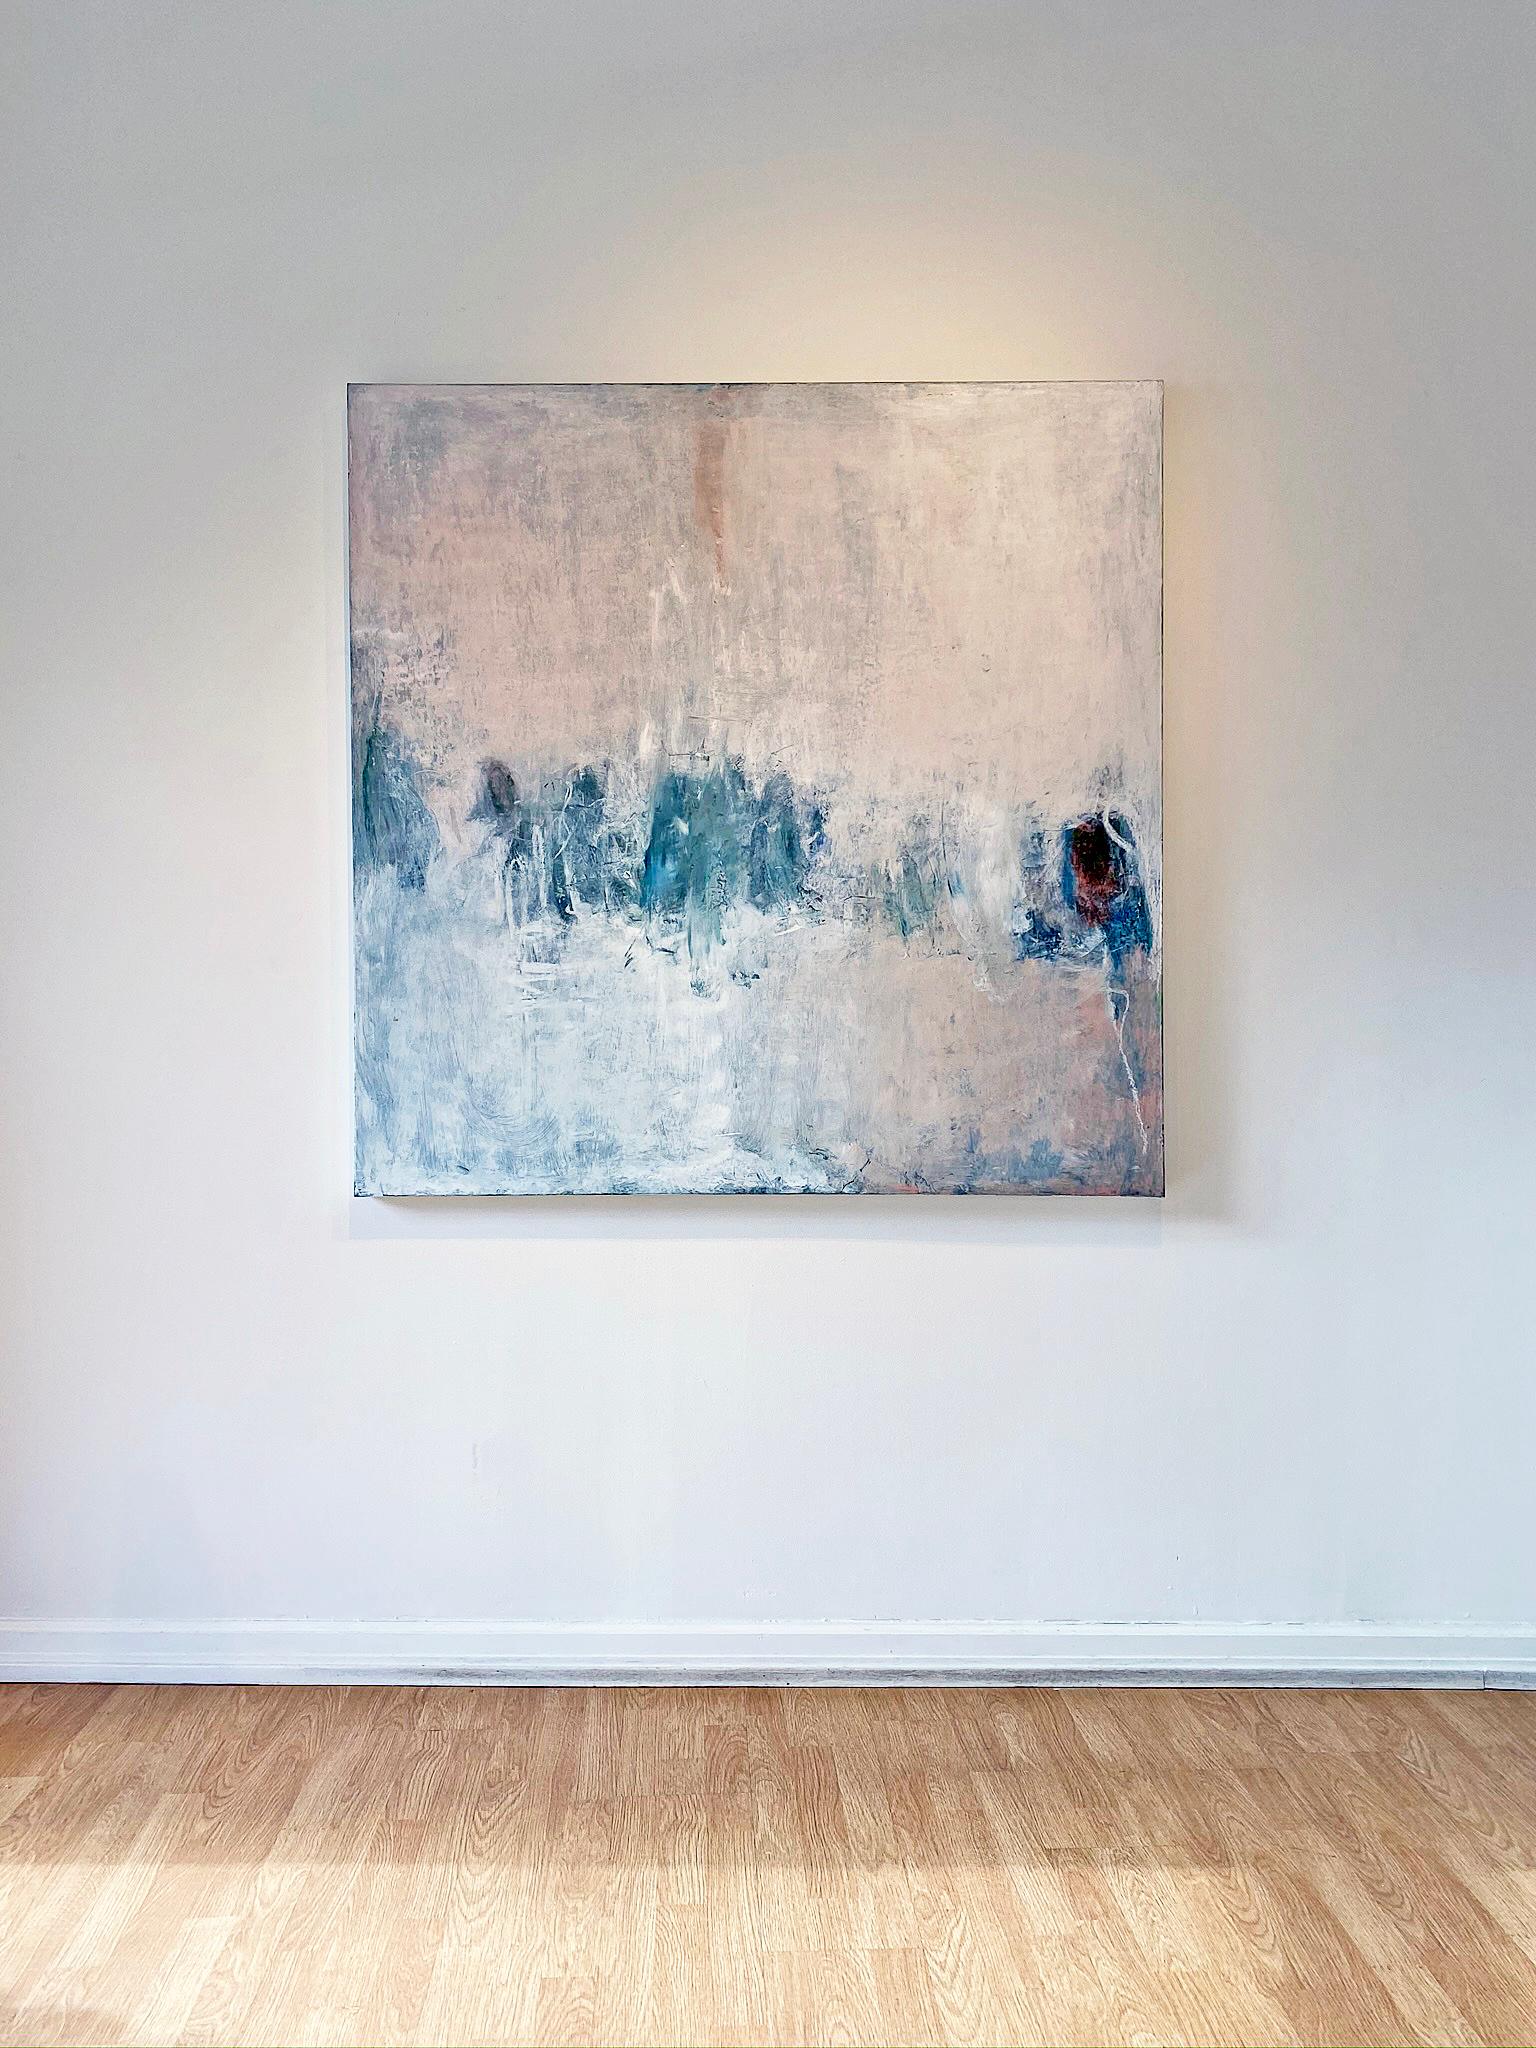 'Winter White Out' in 2019 by New York City base,  French artist Sandrine Kern. Oil and cold wax on canvas, 54 x 54 in. This abstracted landscape painting features a winter scene in colors of beige, white, peach, and hints of blue and